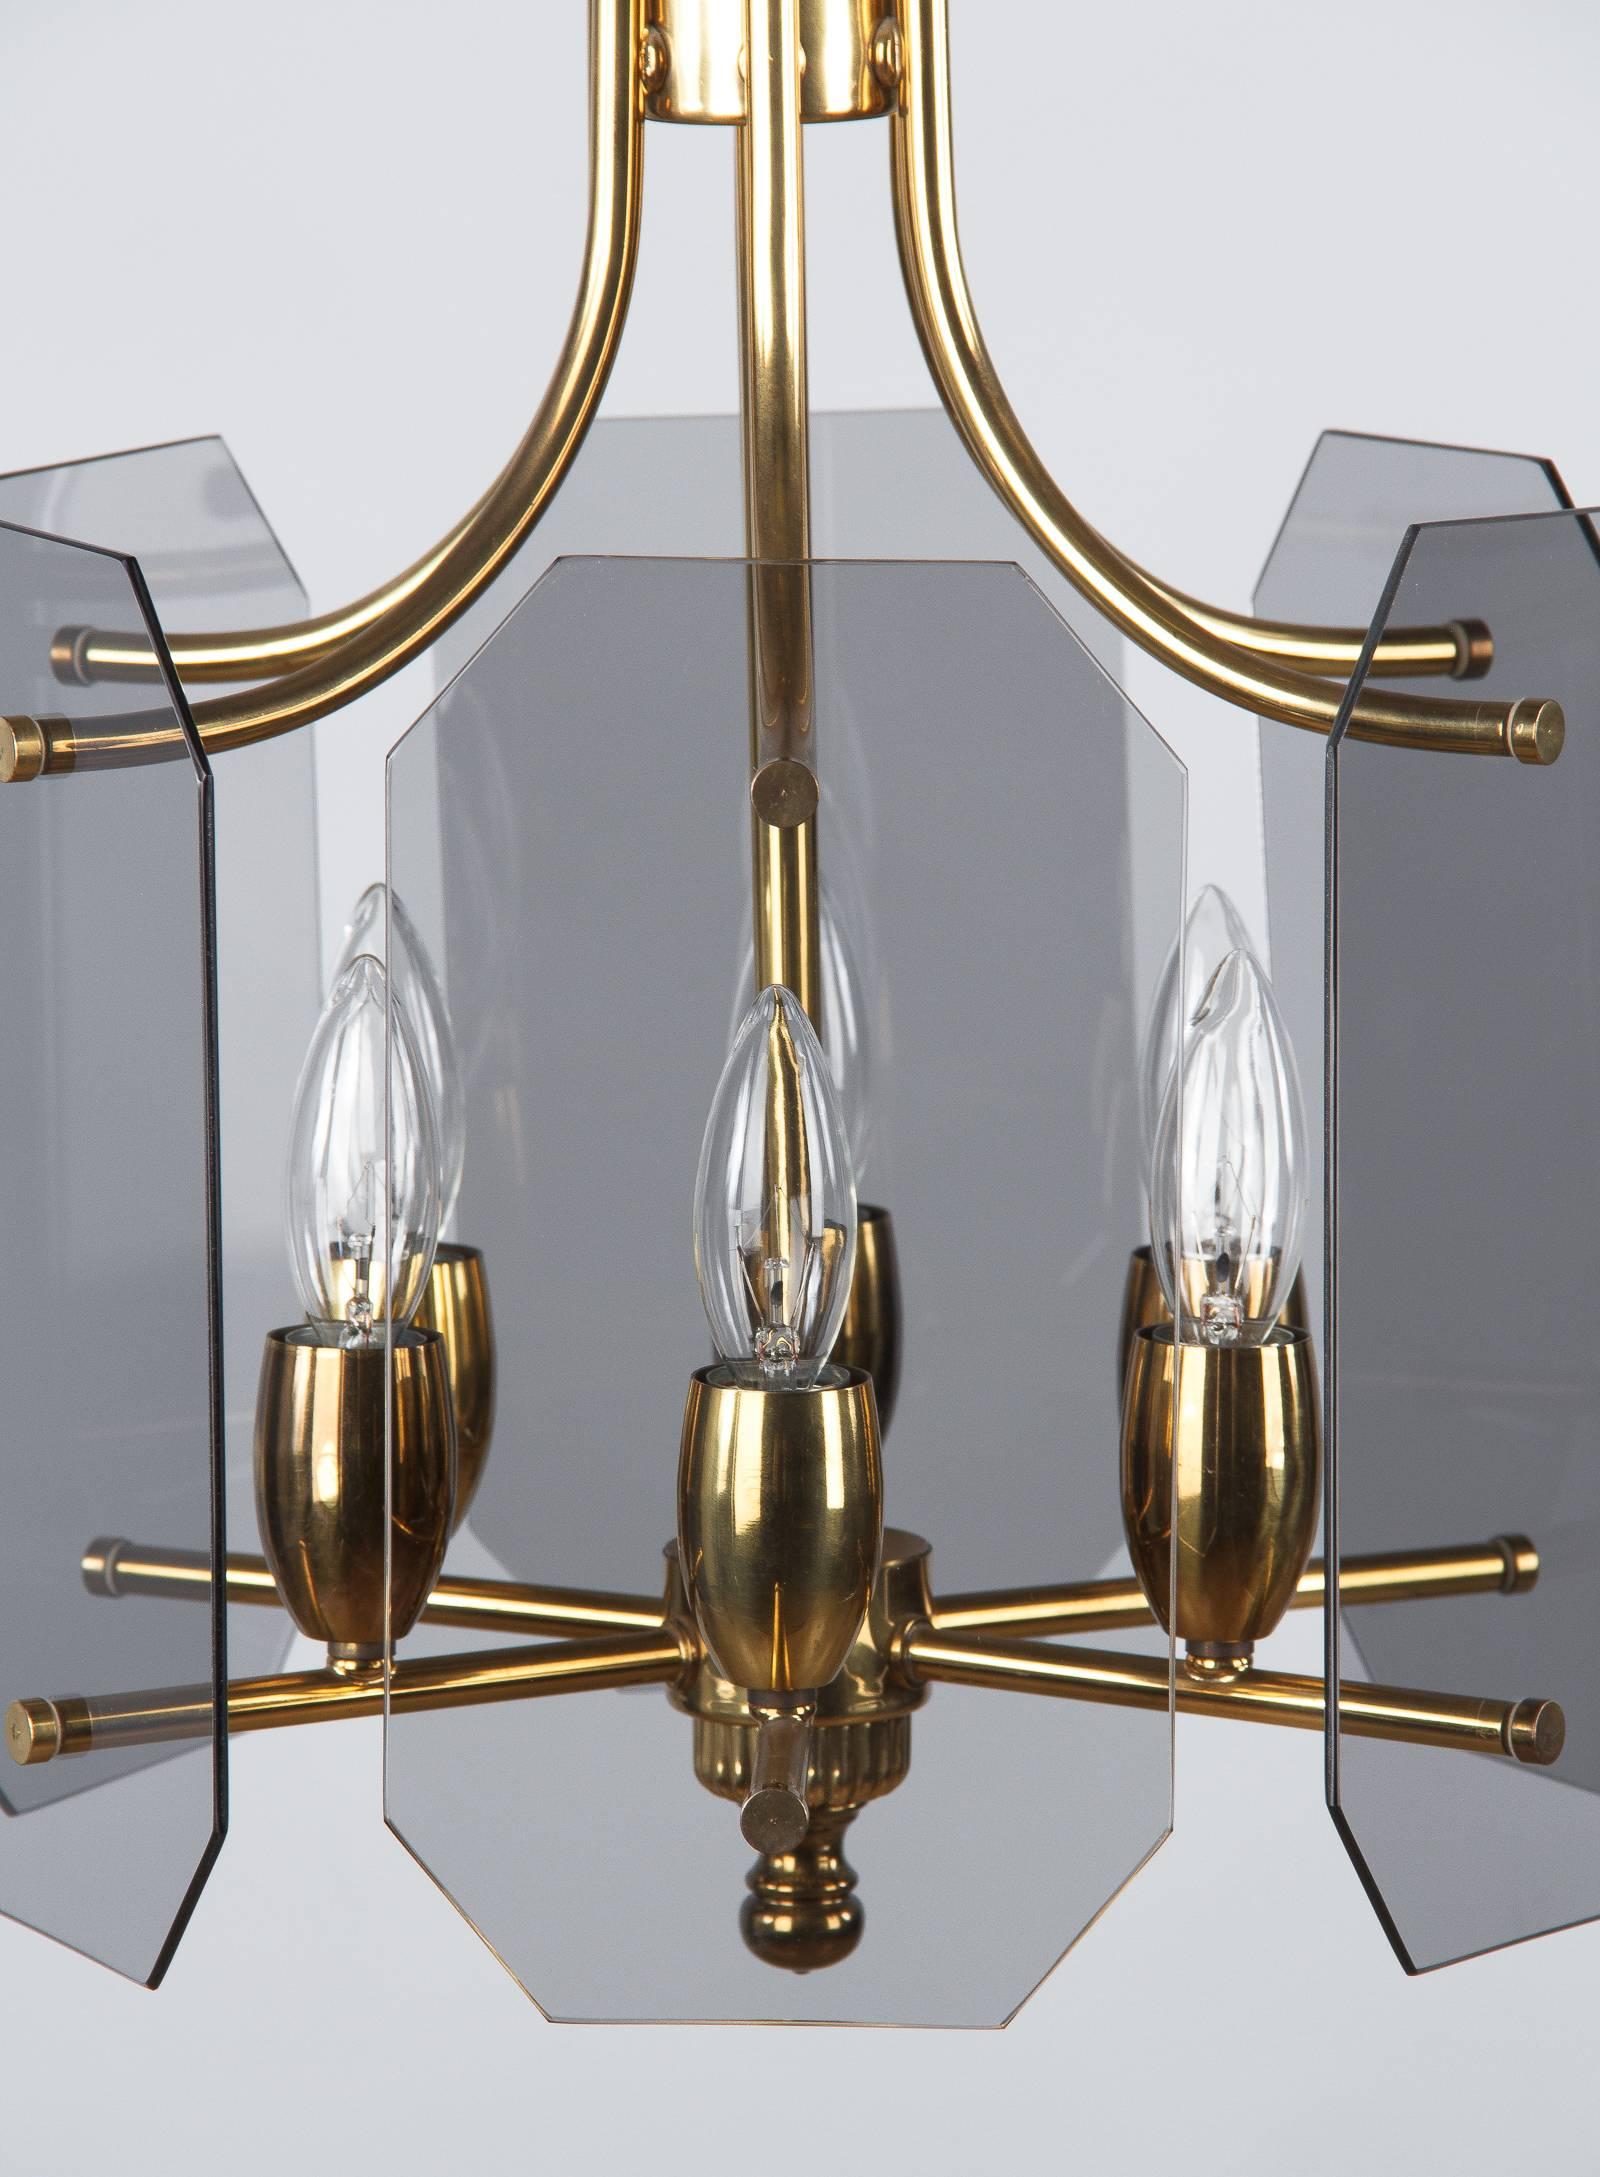 20th Century Midcentury French Brass Chandelier with Smoked Glass Panels, 1960s